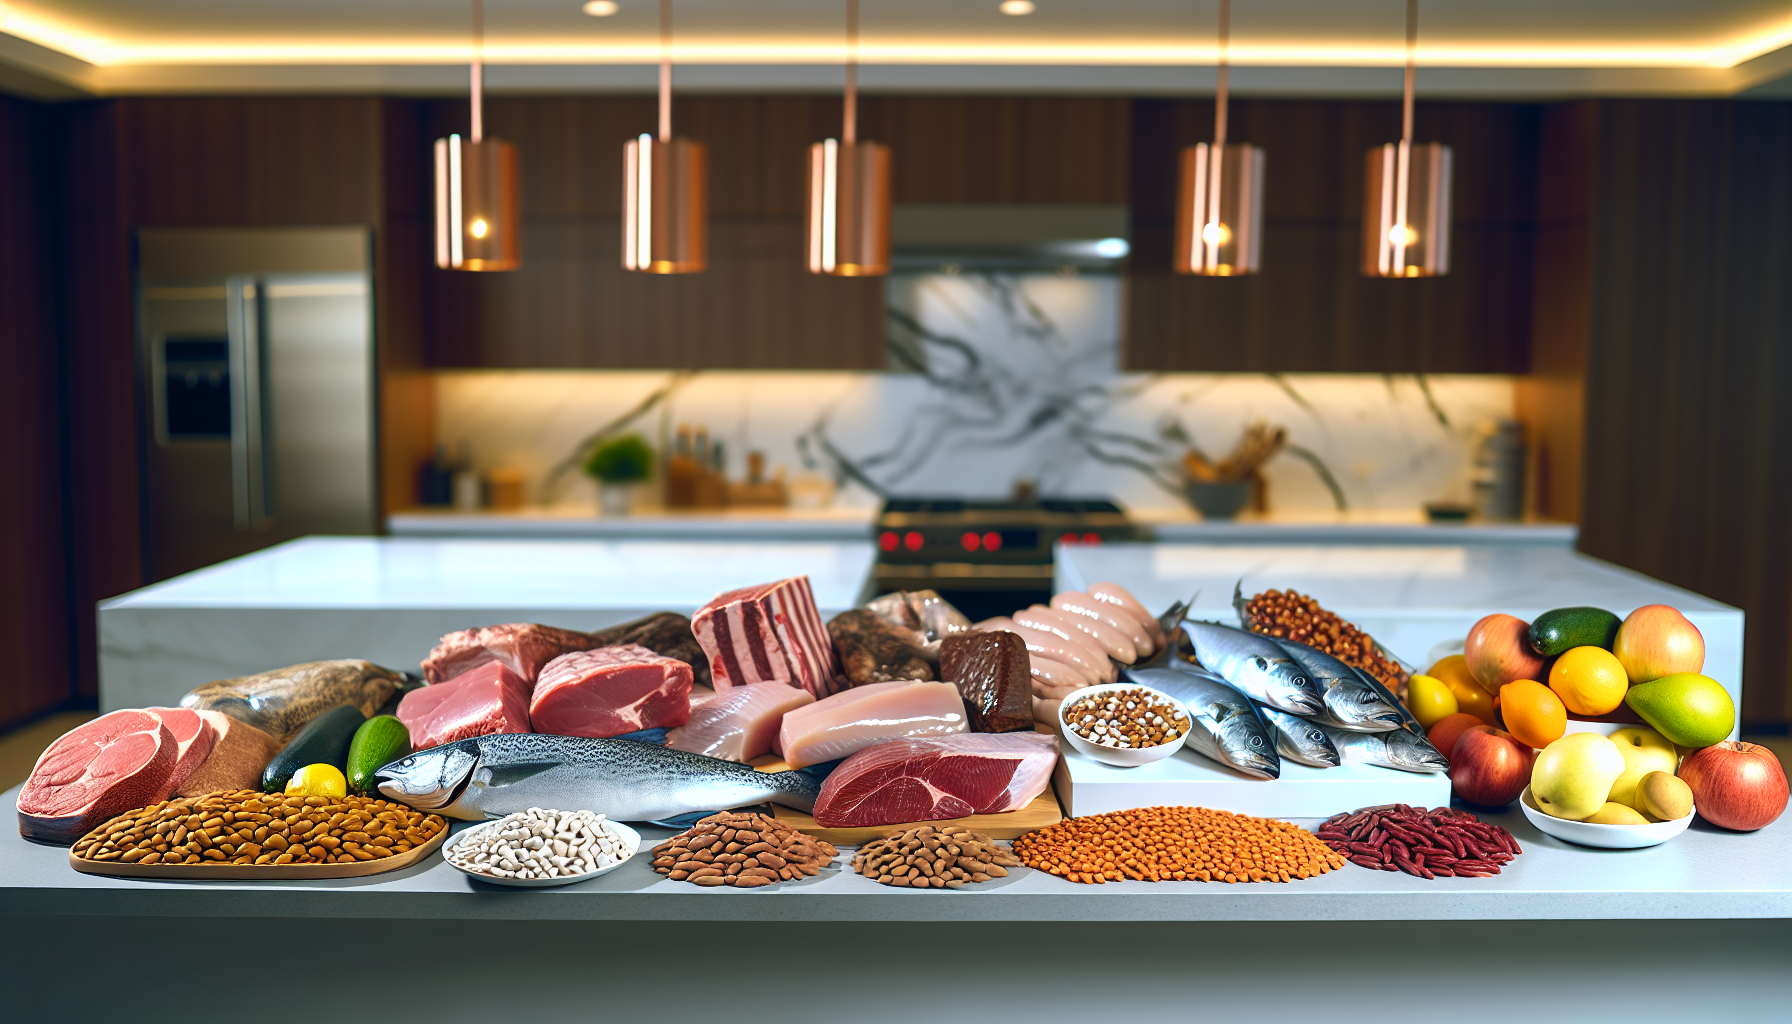 A selection of protein-rich foods including lean meat, fish, and legumes